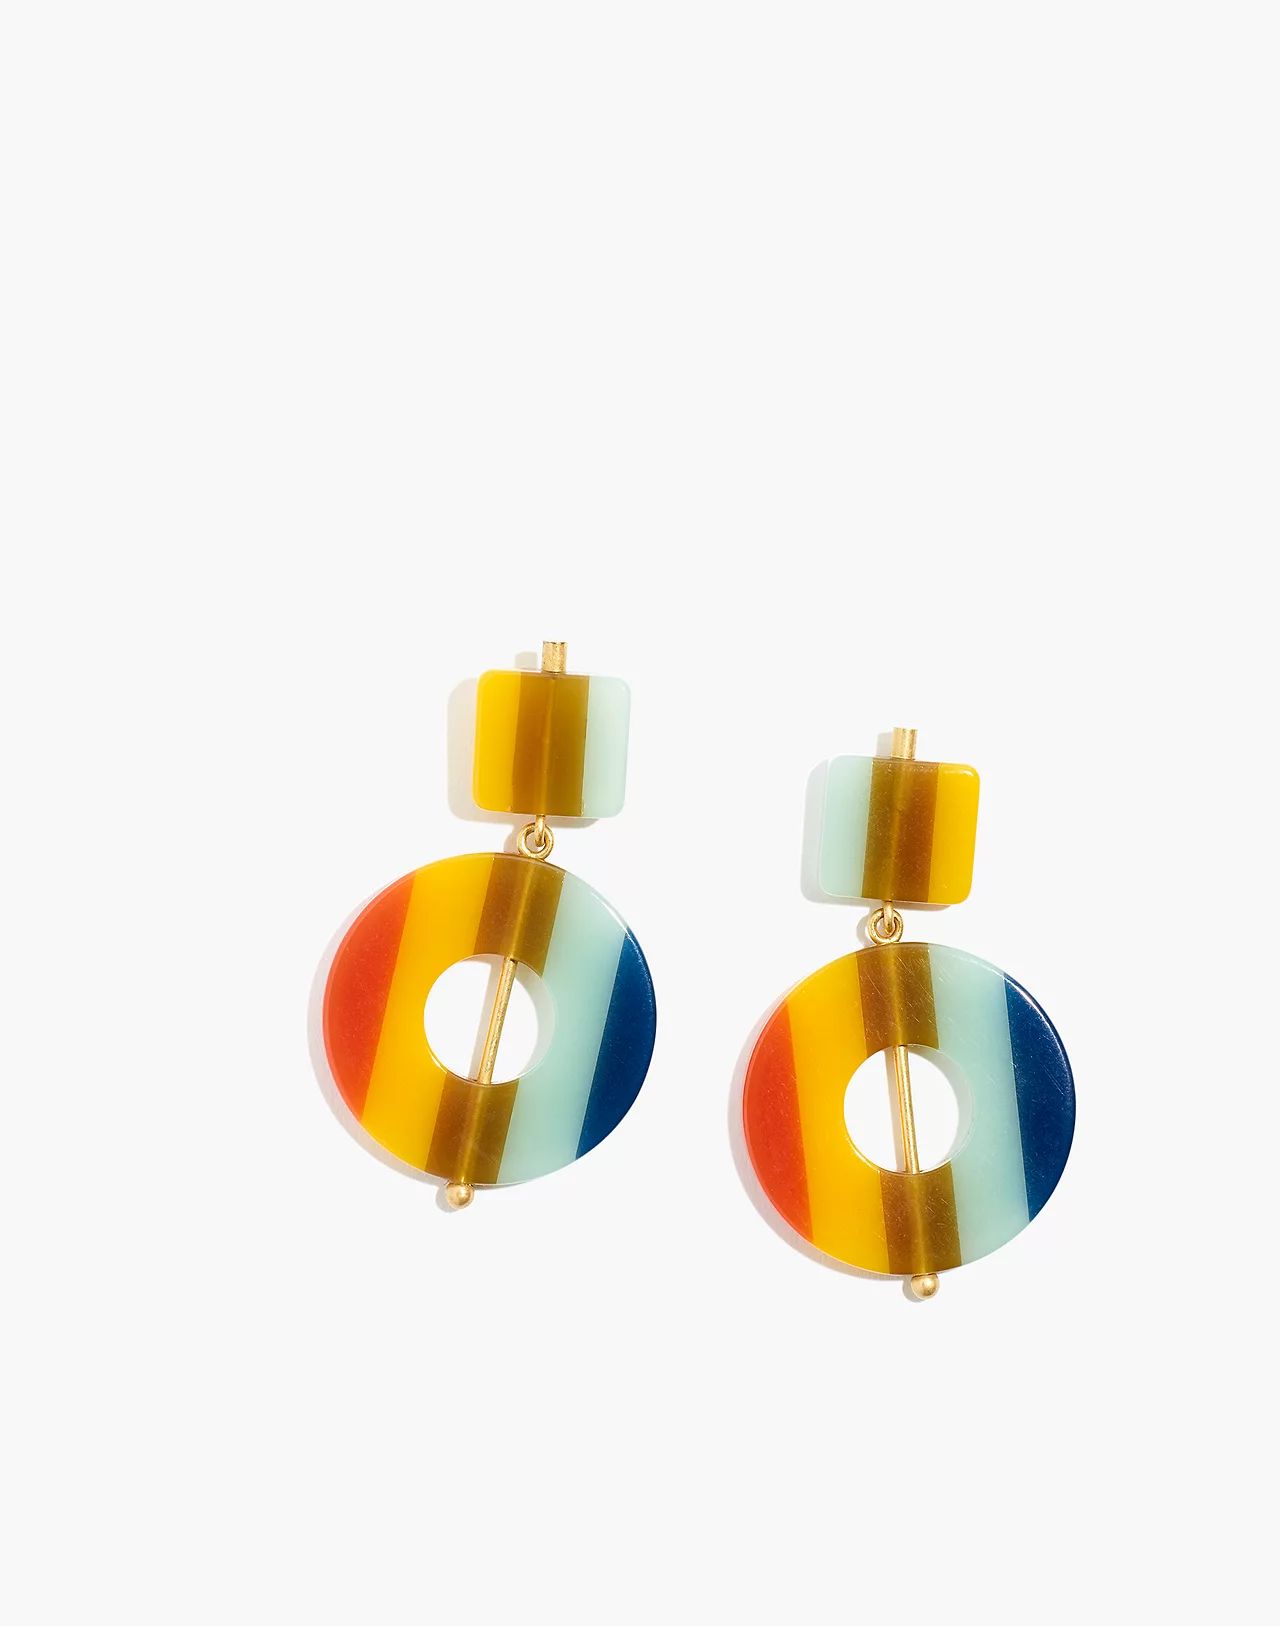 Linked Shapes Statement Earrings in Rainbow Stripe | Madewell